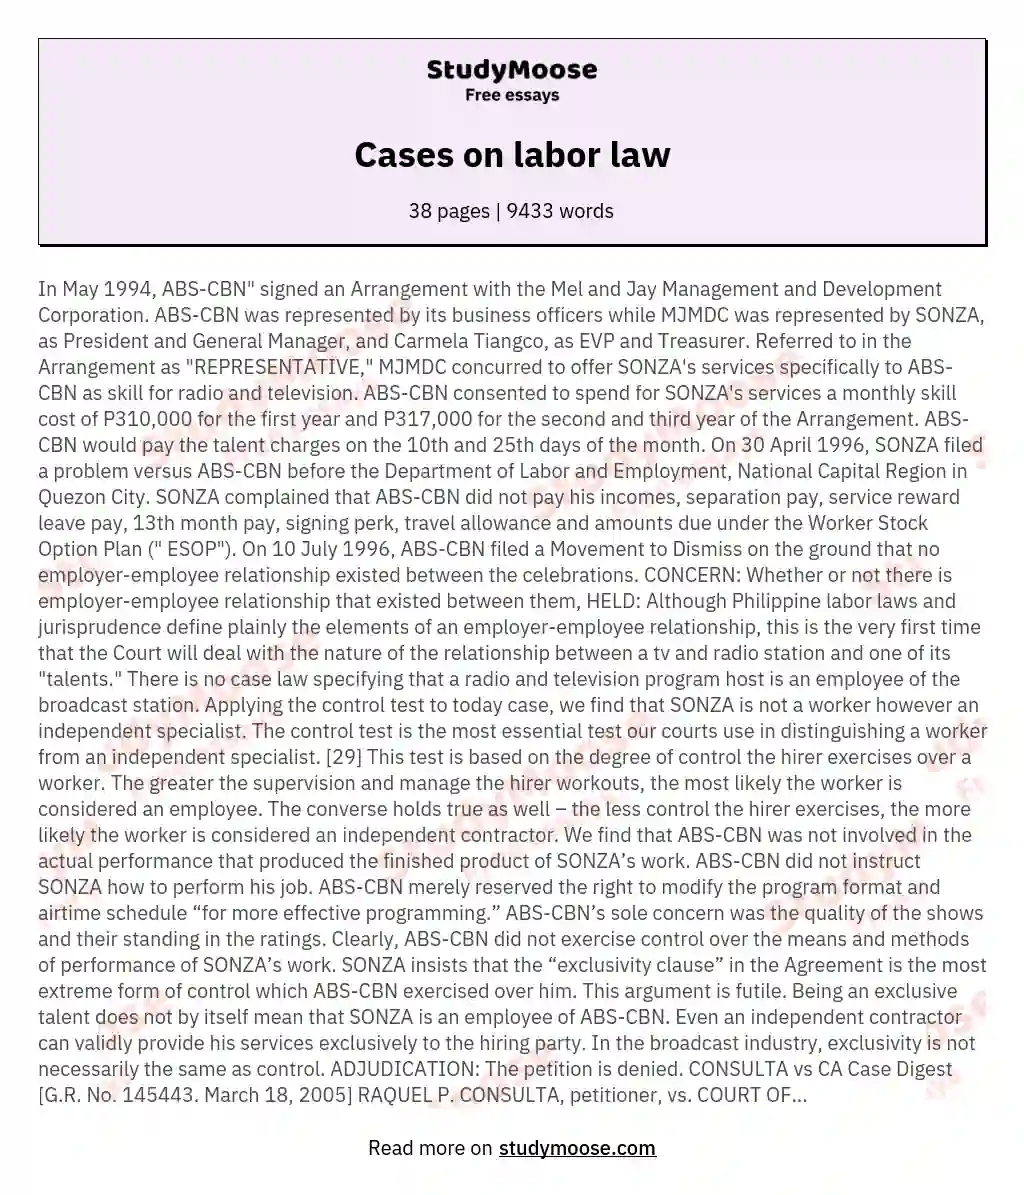 Cases on labor law essay